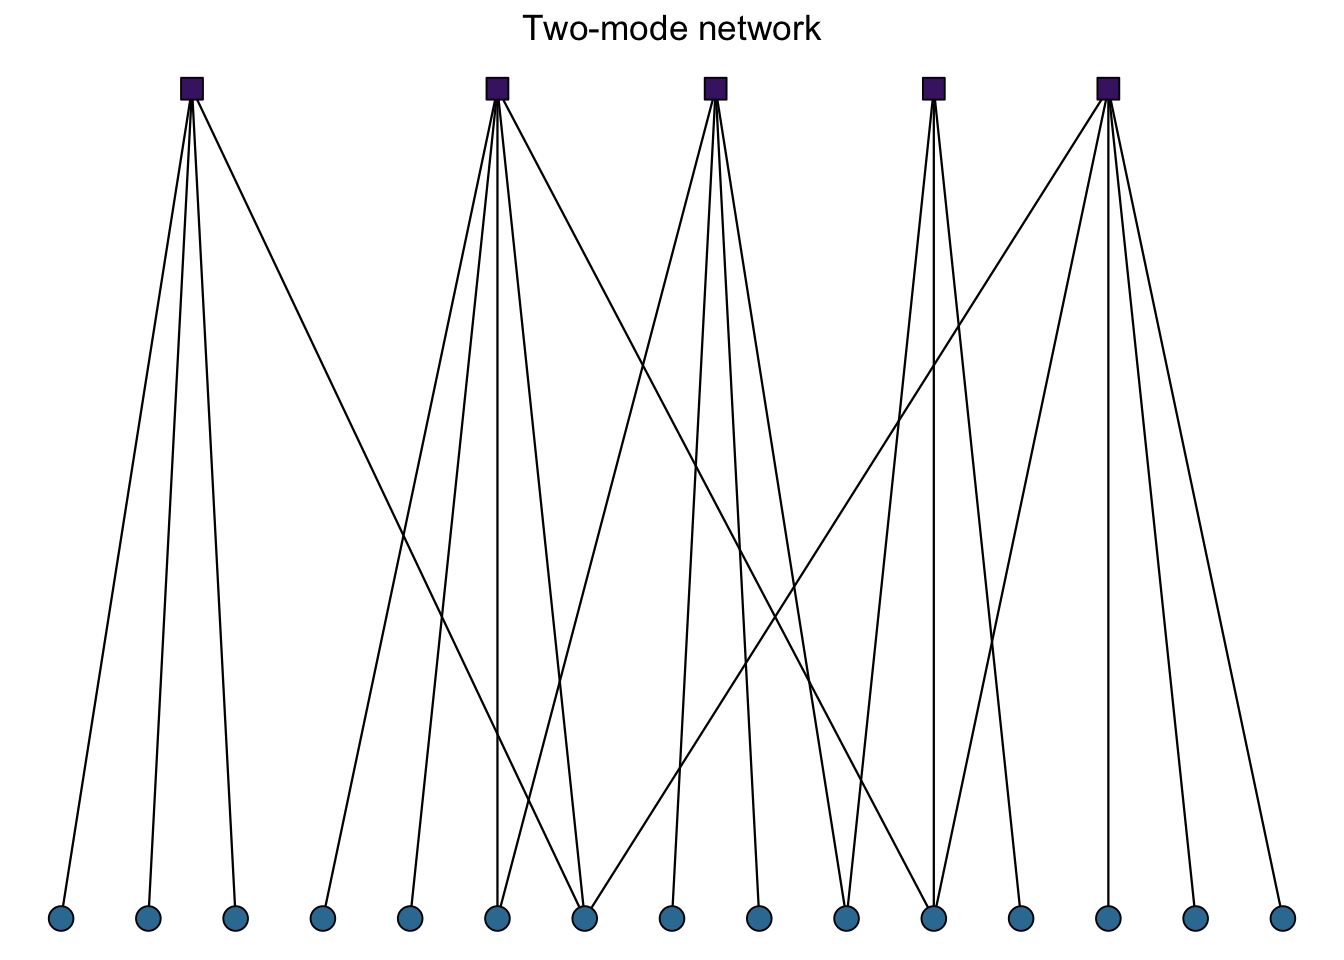 Two types of networks